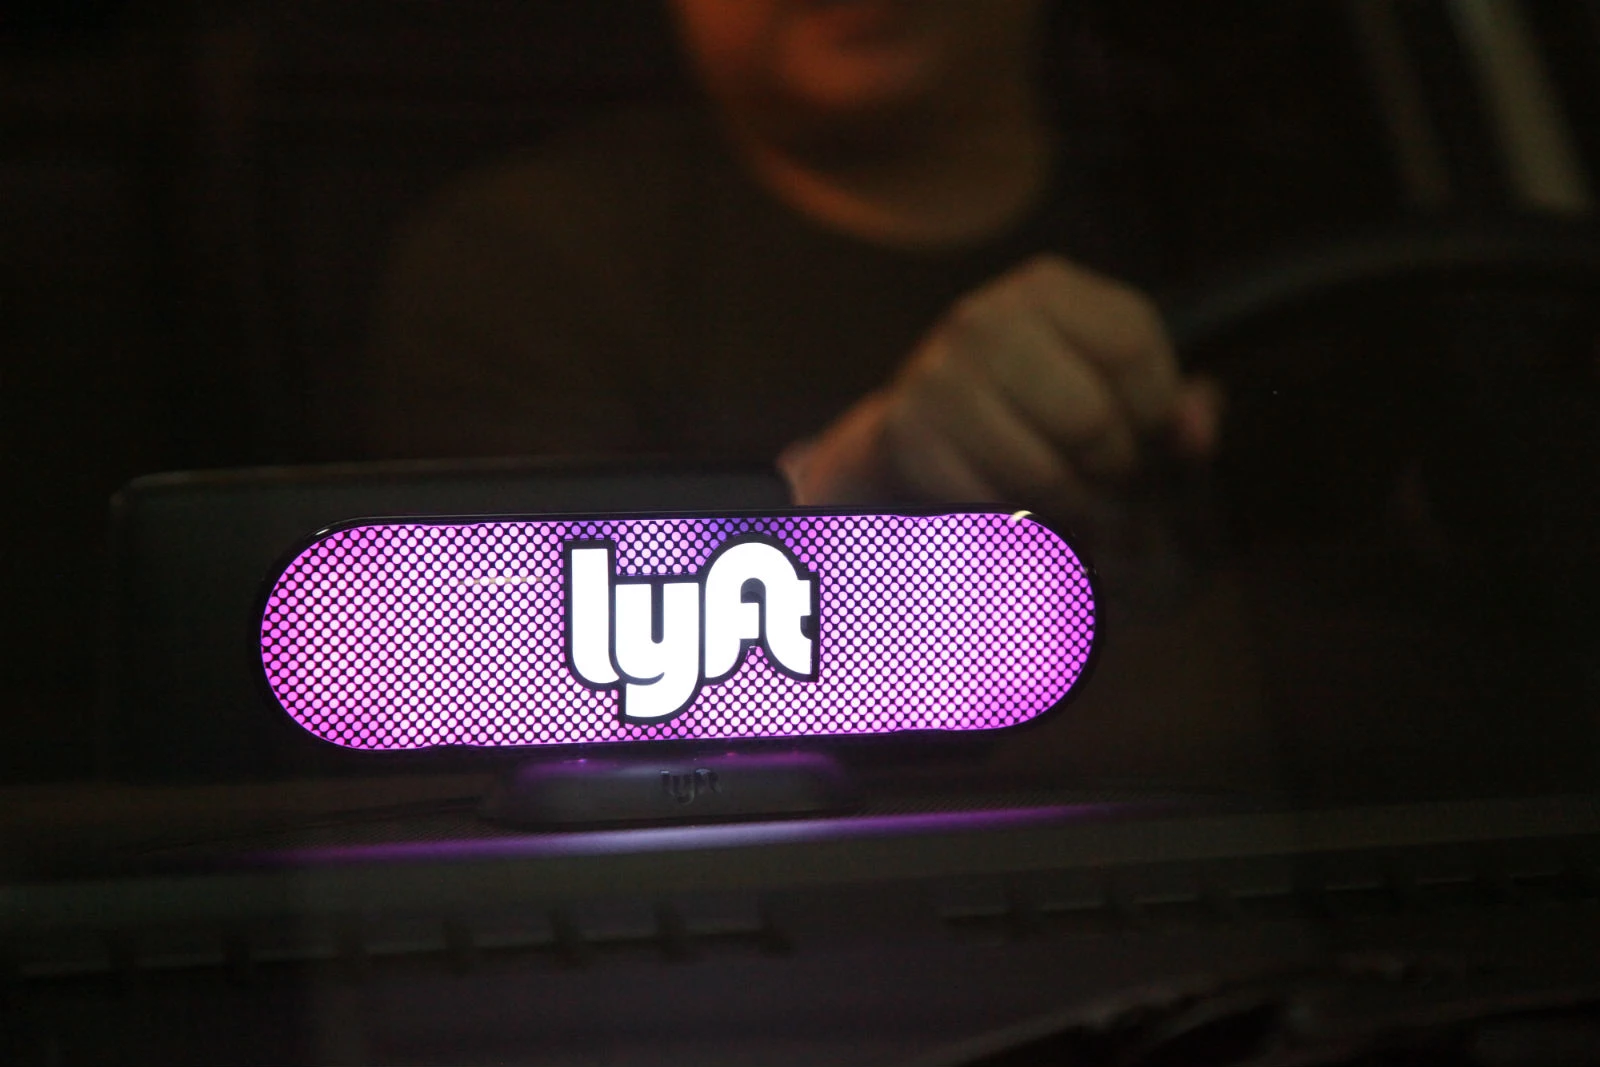 What services are currently offered by Lyft?